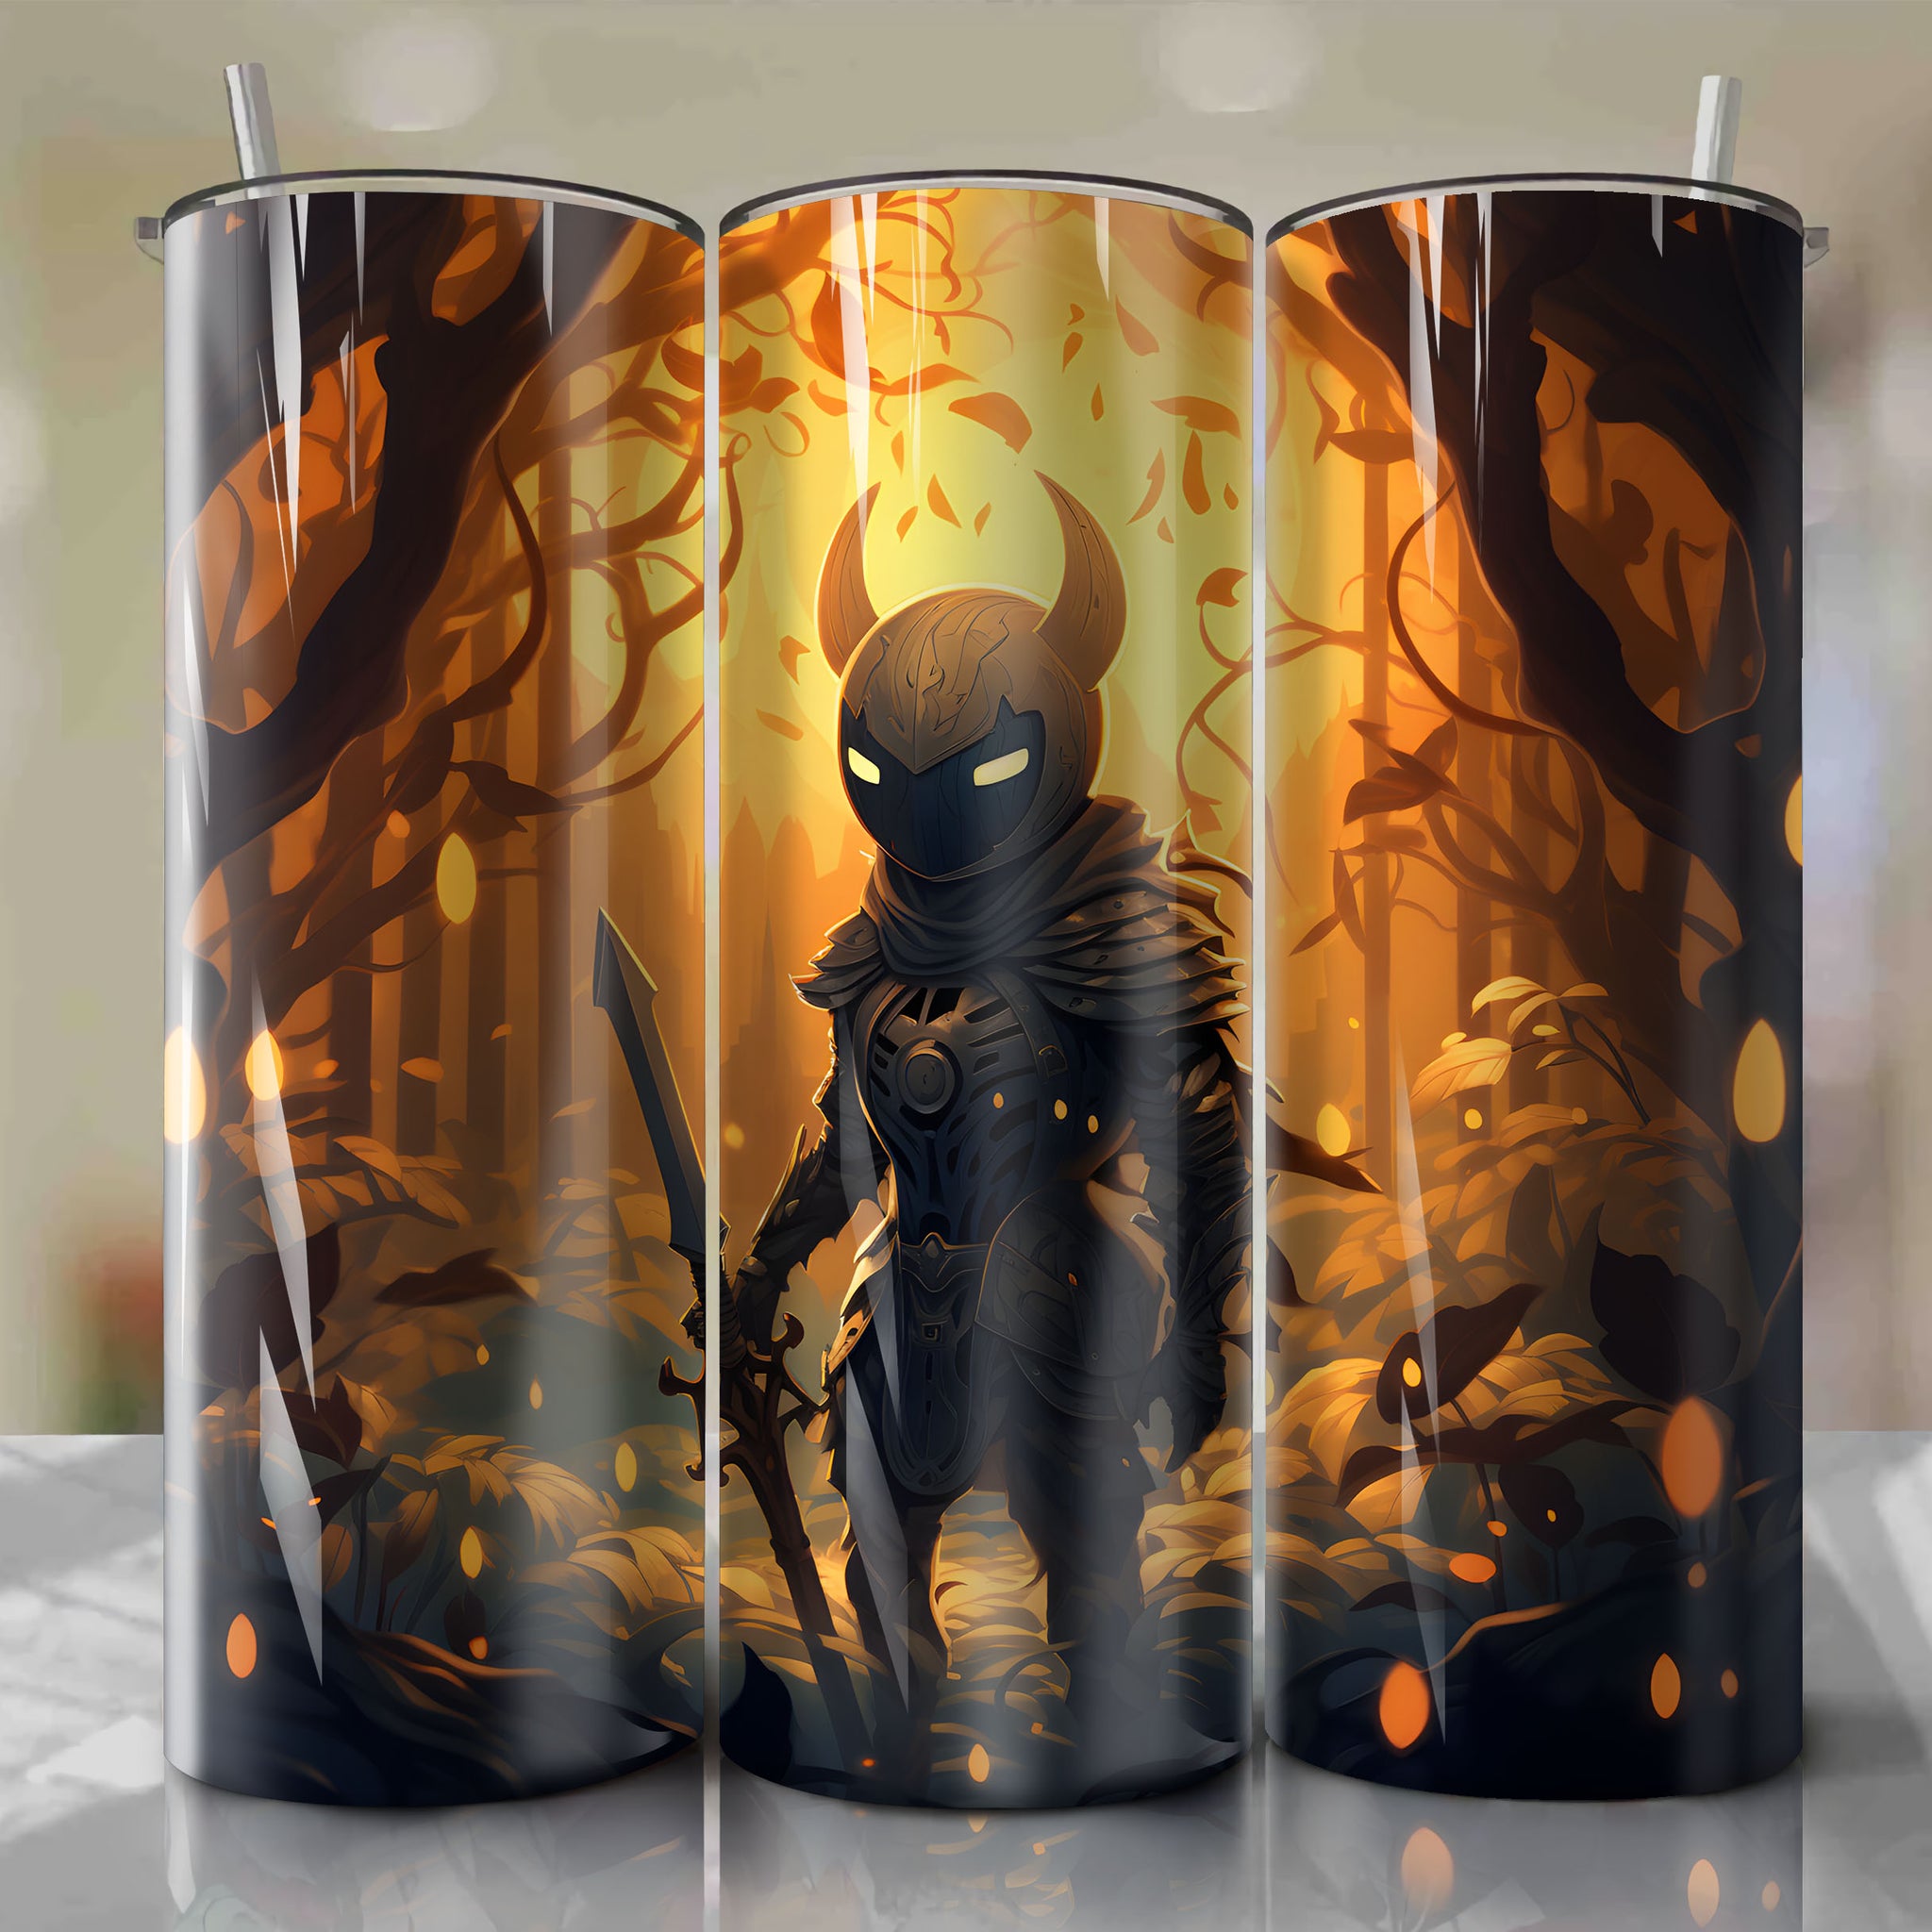 20 Oz Tumbler Wrap - The Knight from Hollow Knight: Captivating Artwork for Fans
